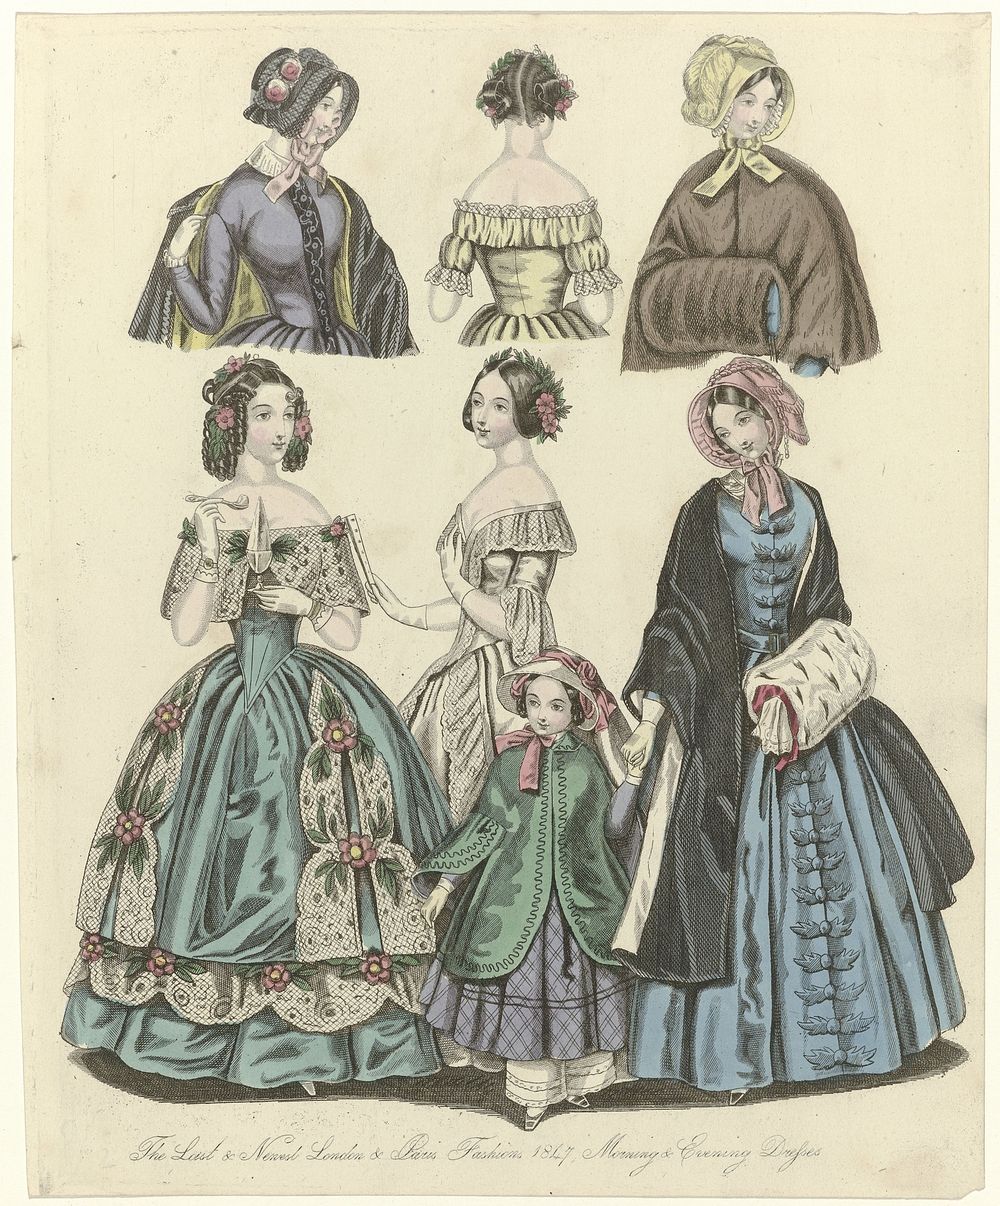 The World of Fashion, 1847 : The Last & Newest (...)Morning & Evening Dresses (1847) by anonymous